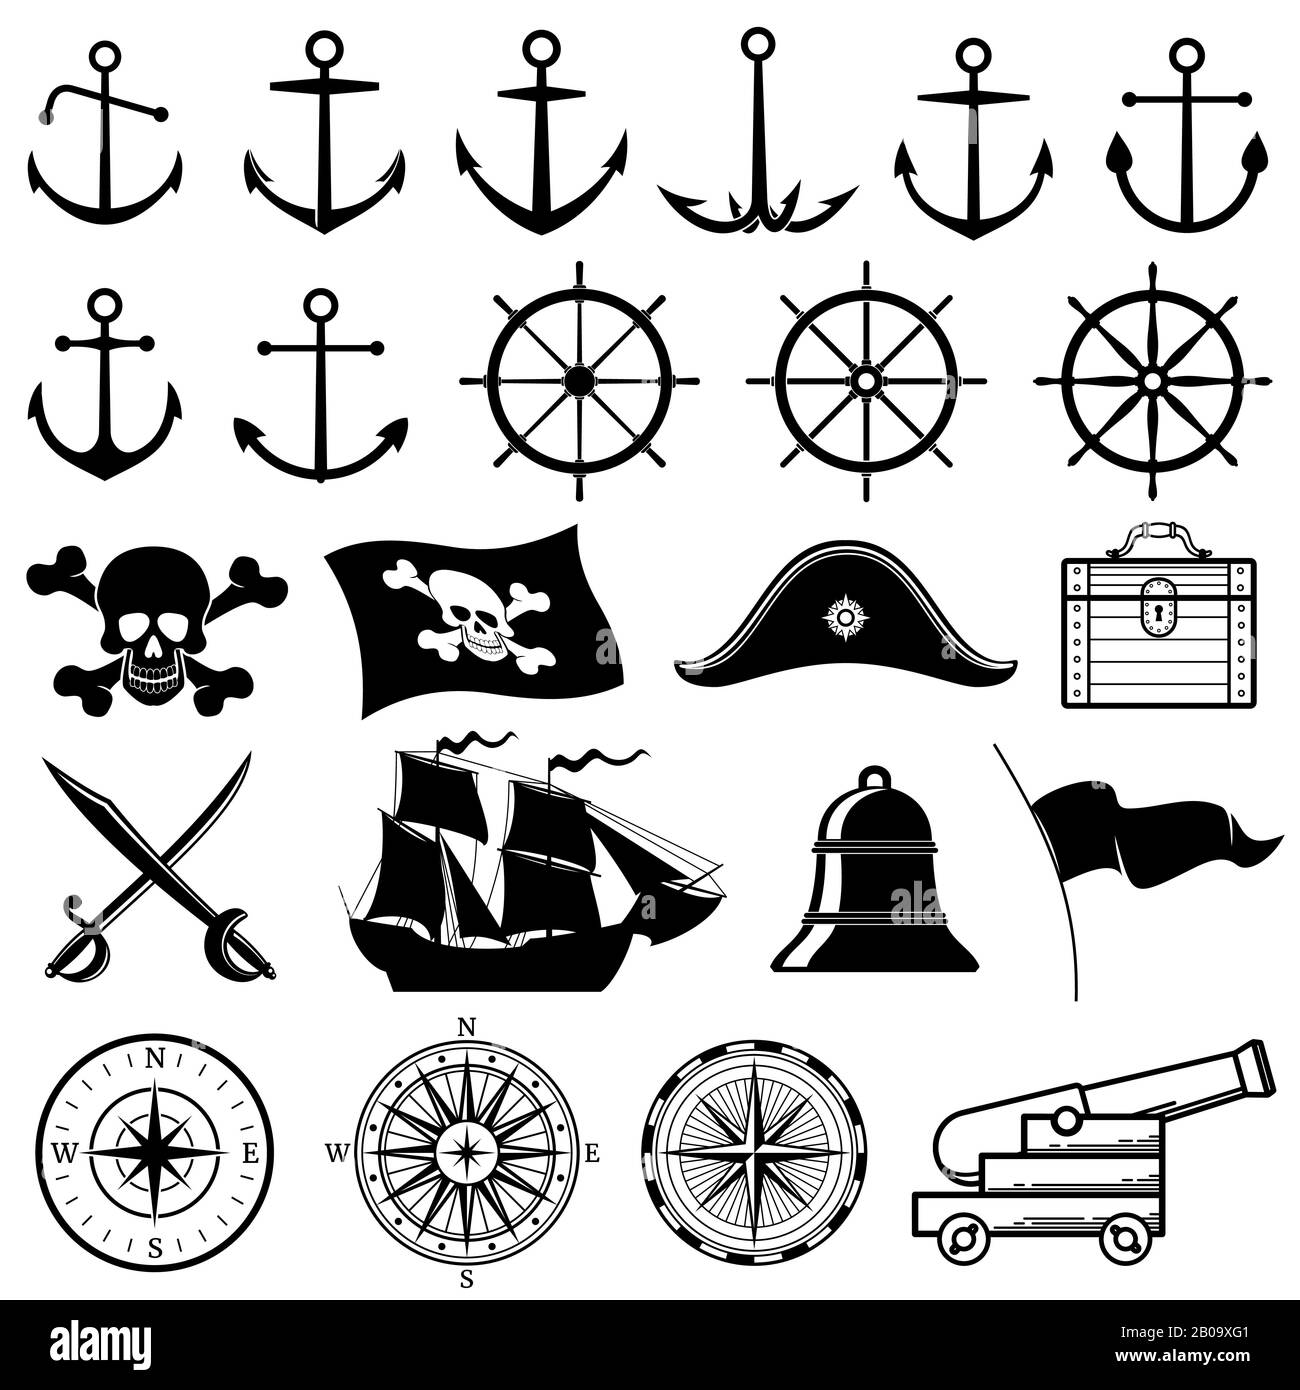 Vintage nautical or marine, pirate vector icons. Marine compass and nautical elements silhouettes Stock Vector